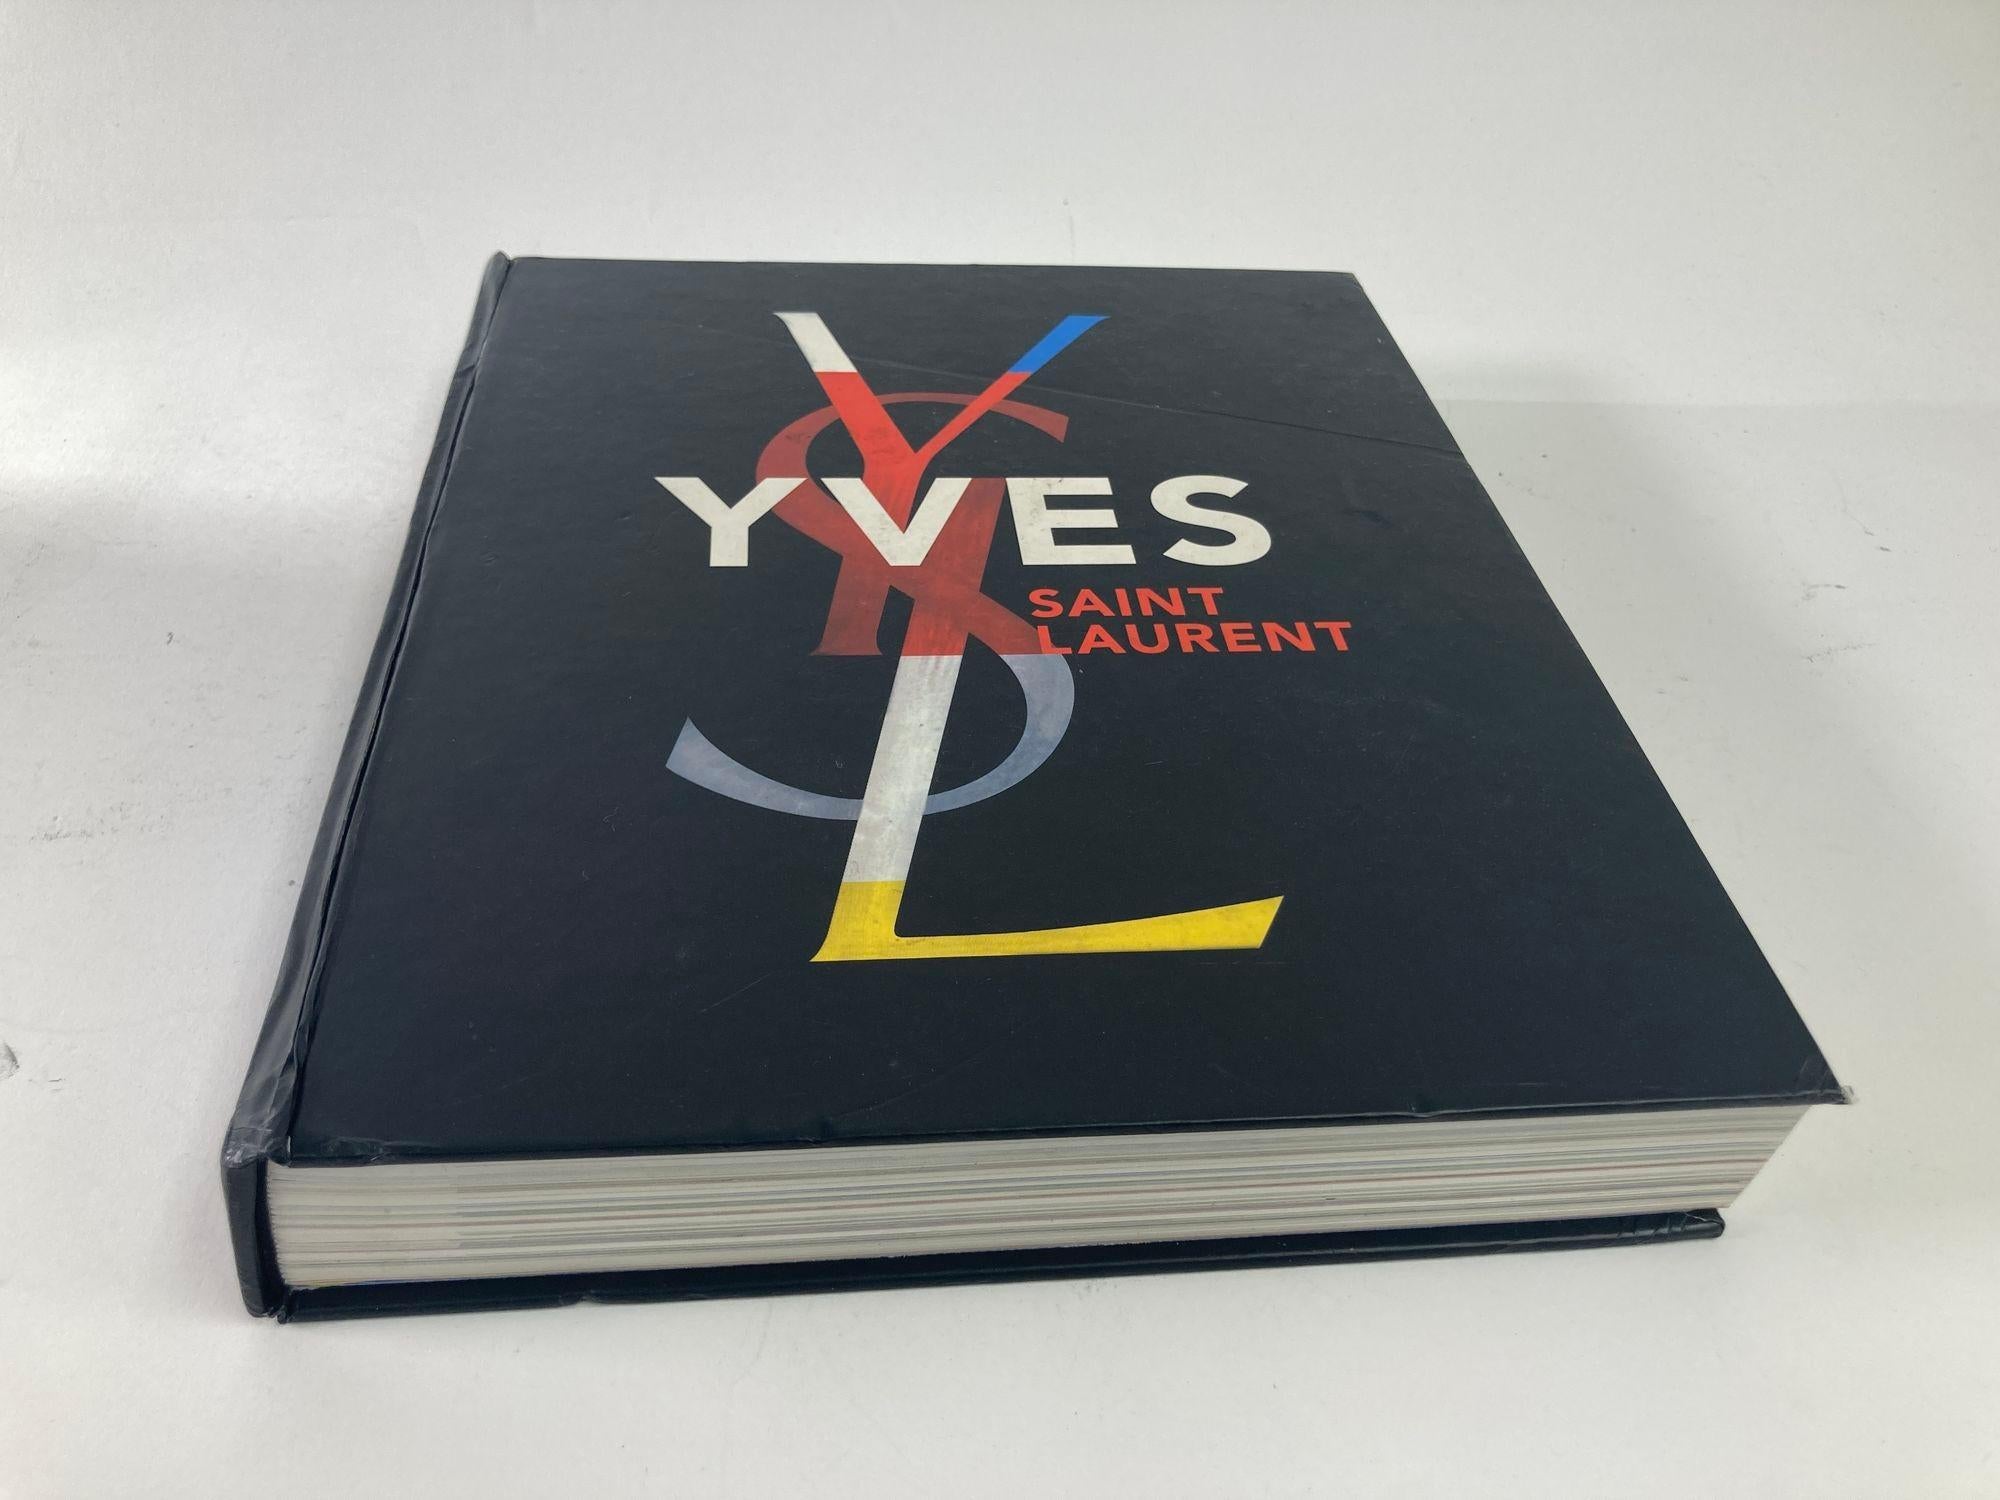 YSL YVES SAINT LAURENT.
YSL Coffee table book.
The most extensive retrospective devoted to Yves Saint Laurent presented his full career from 1958 to 2002 across more than three hundred haute couture garments and numerous archival documents.
Follow